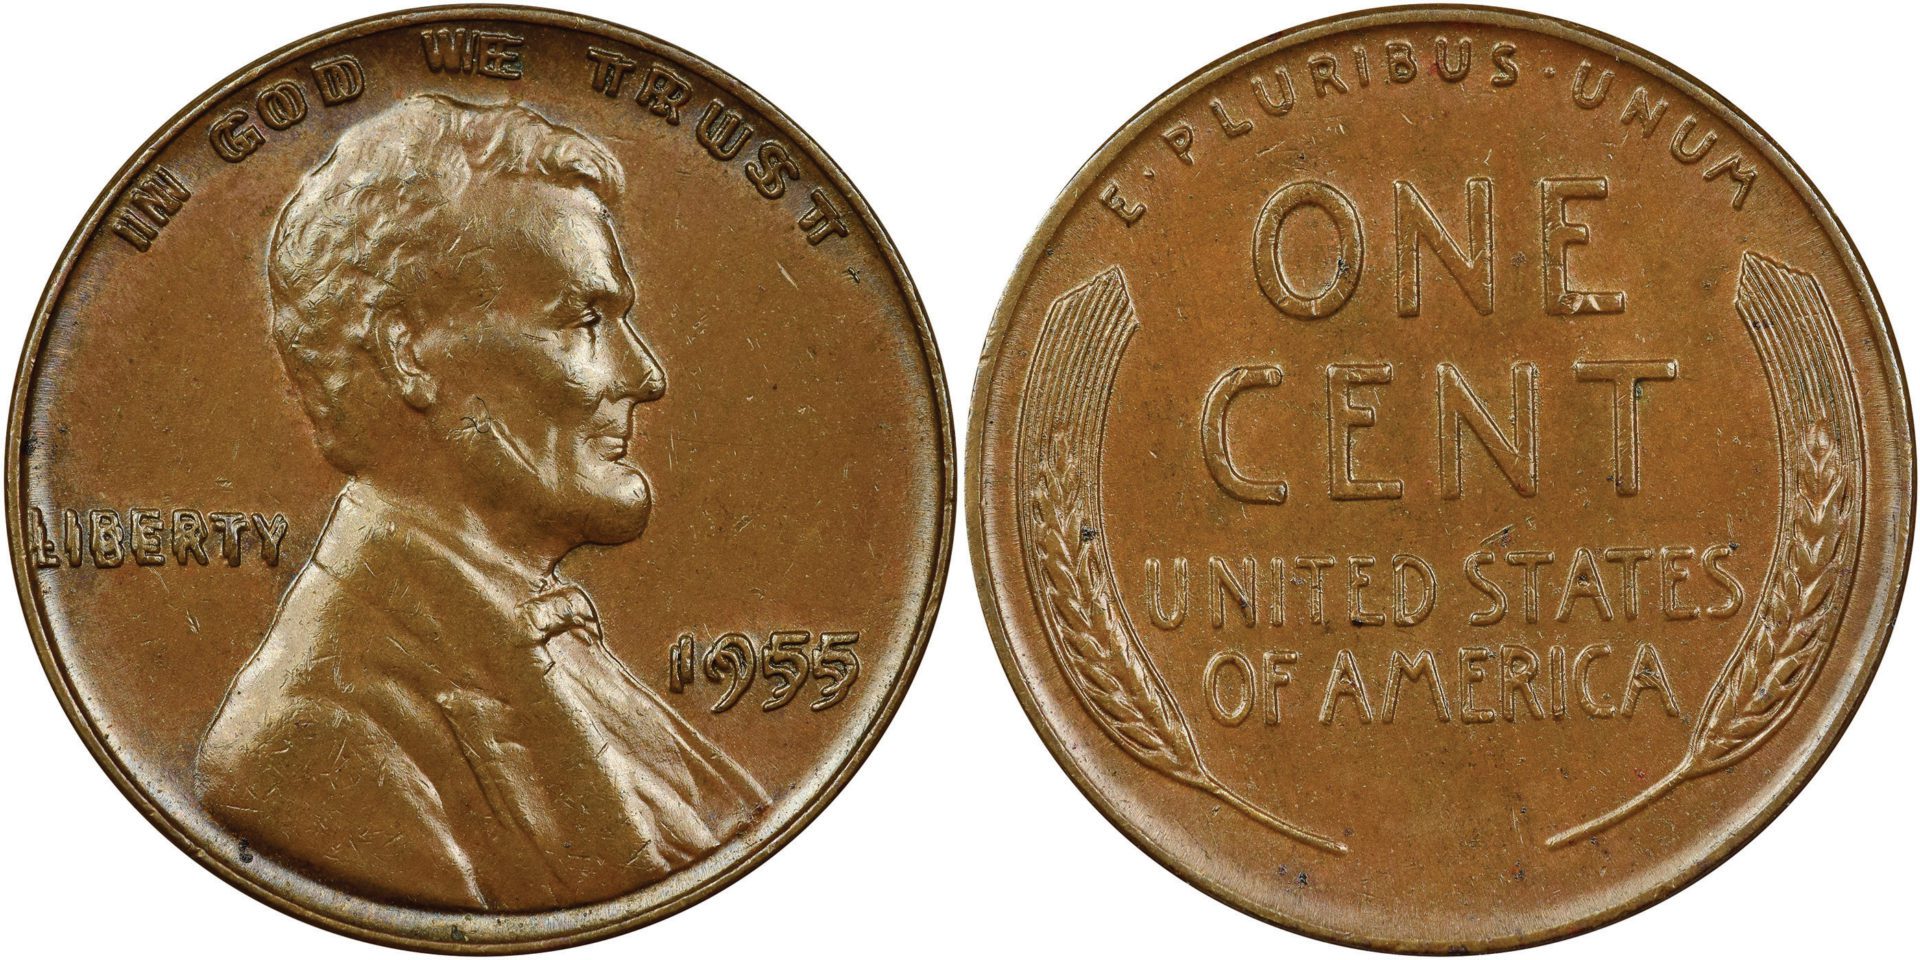 Genuine 1955 Lincoln cent with doubled-die obverse